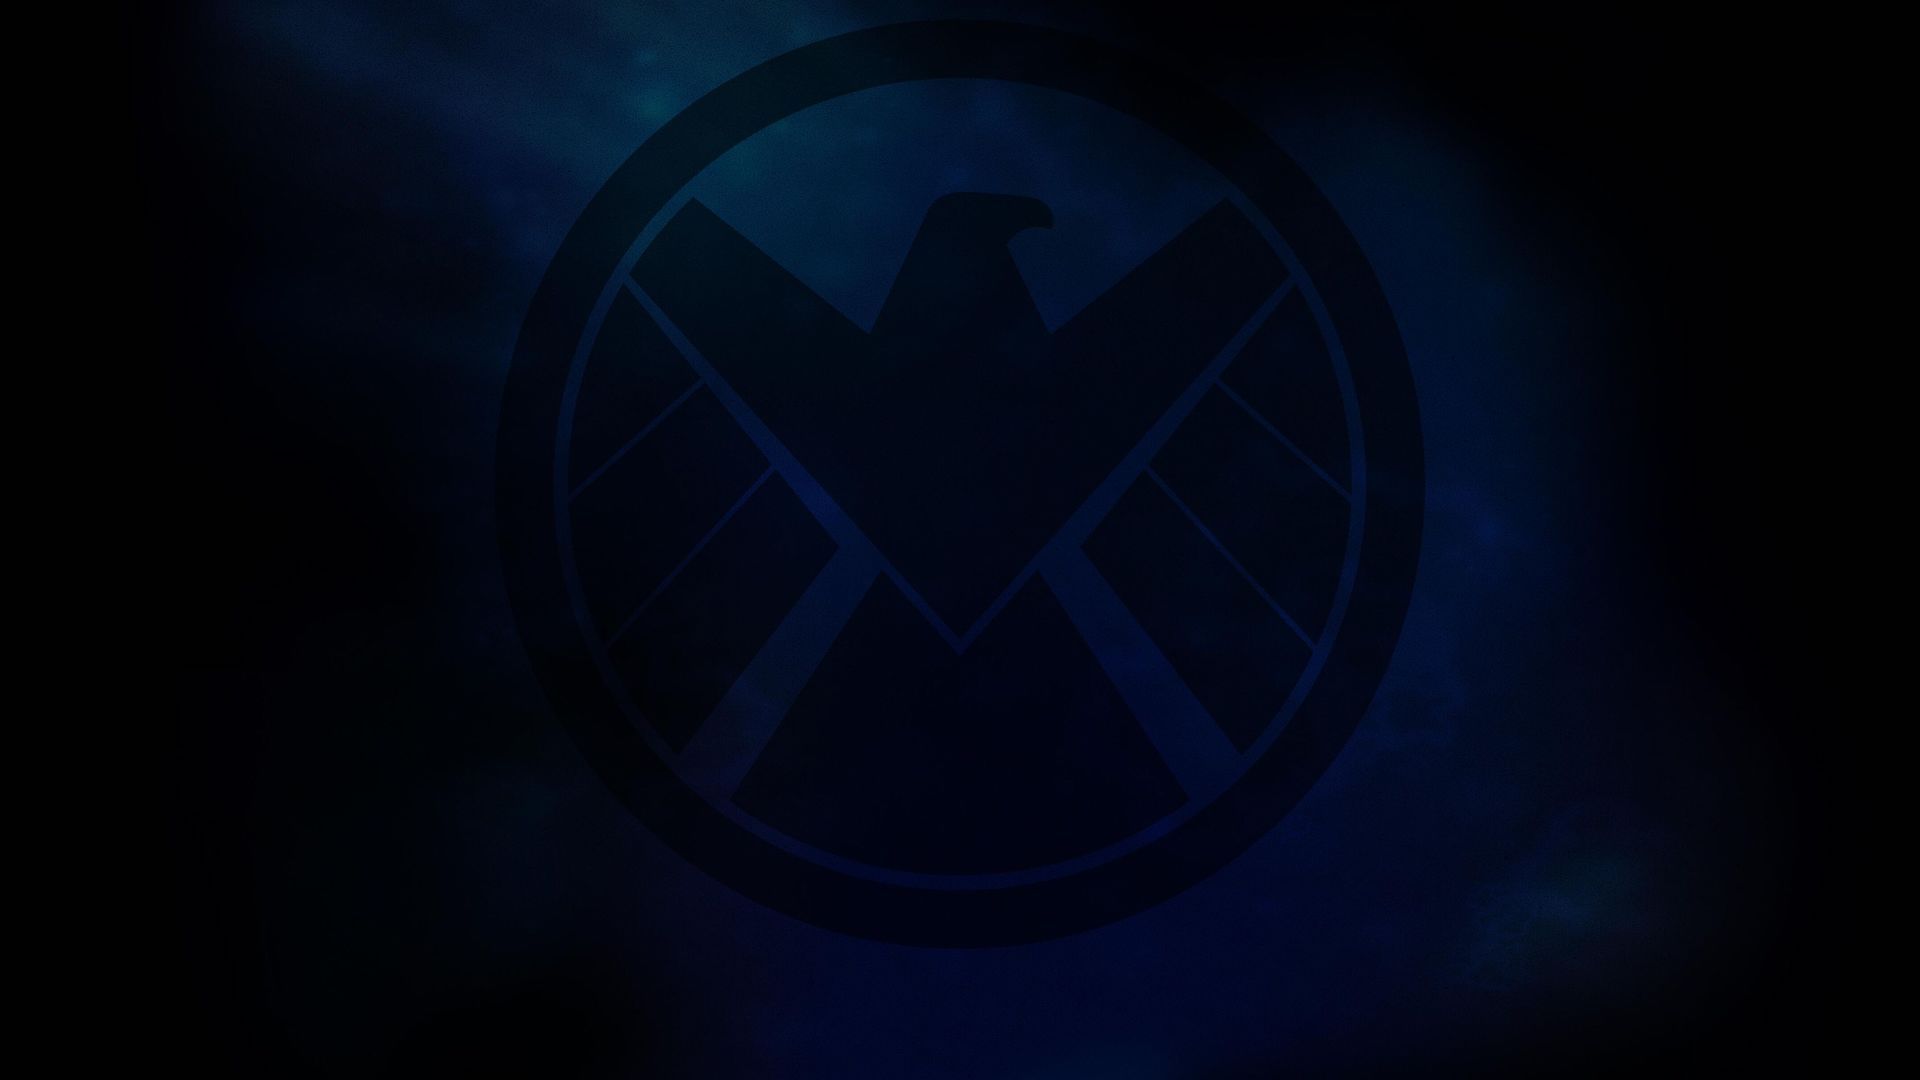 Agents of S.H.I.E.L.D. background